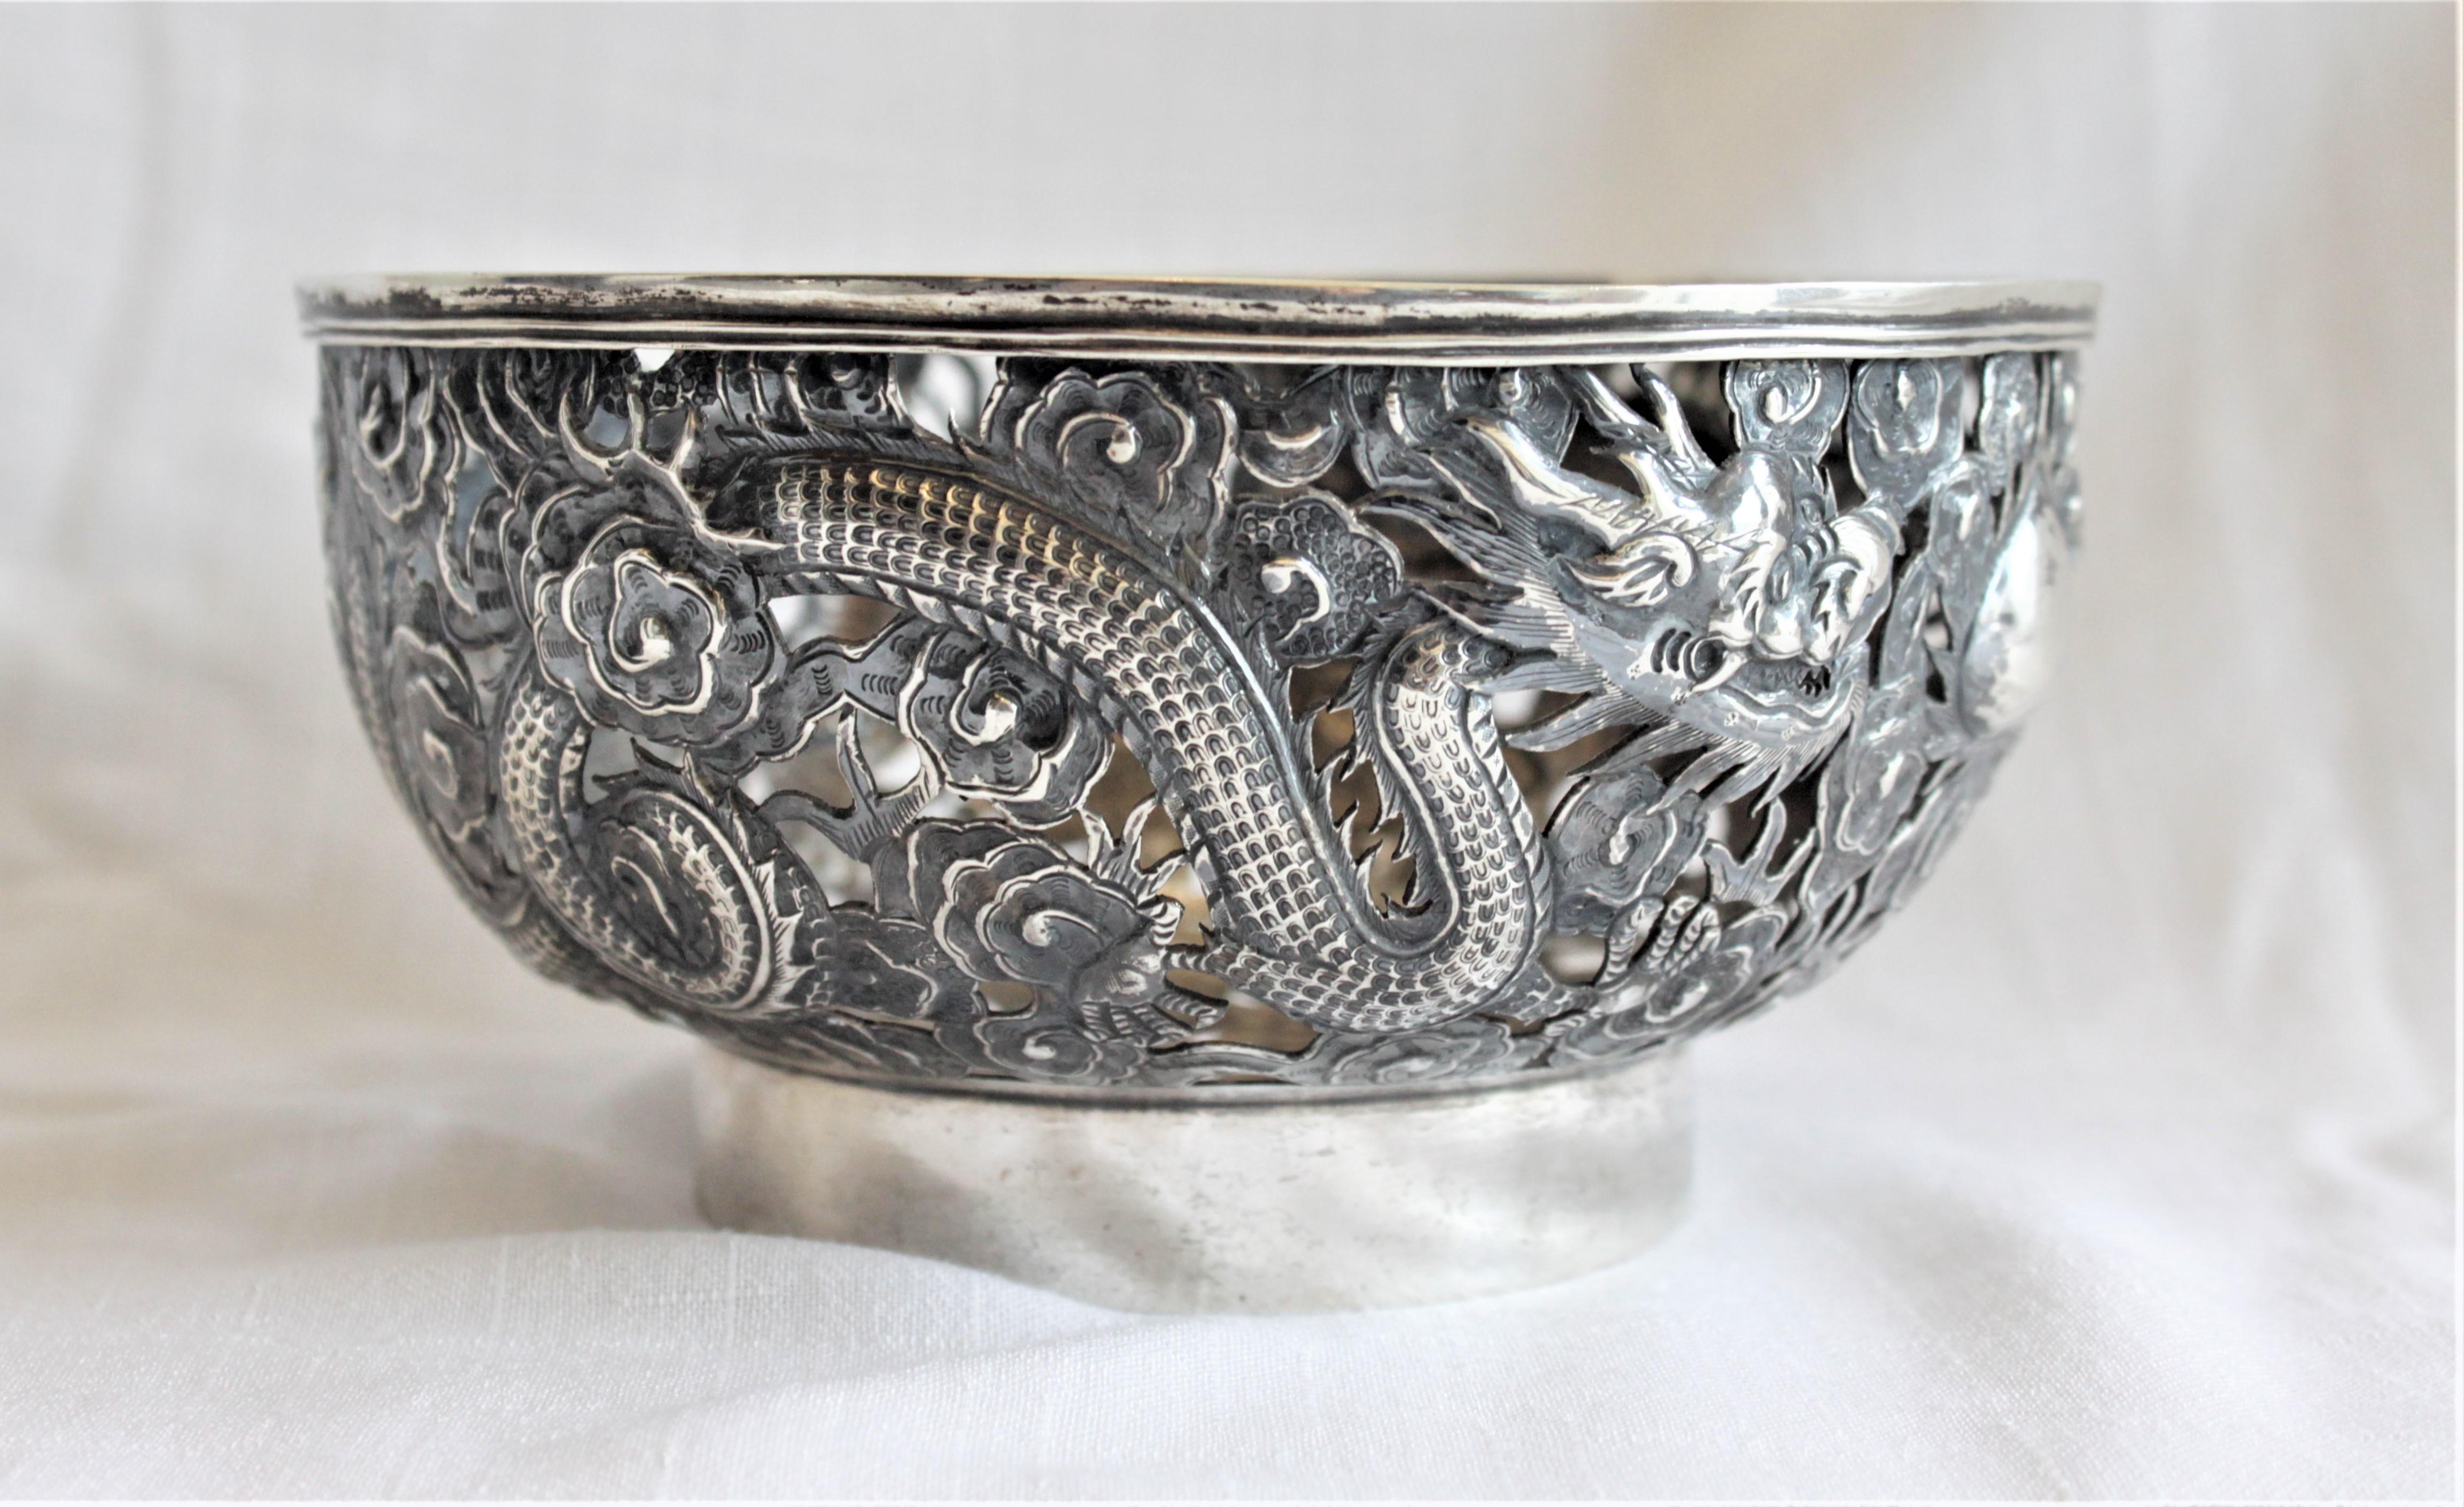 This antique Chinese silver bowl was made during the Qing dynasty in approximately the year 1900 by the Wang Hing Company and is presumed to be sterling or .925 silver, but has not been tested. The sides of the bowl are done in extremely intricate